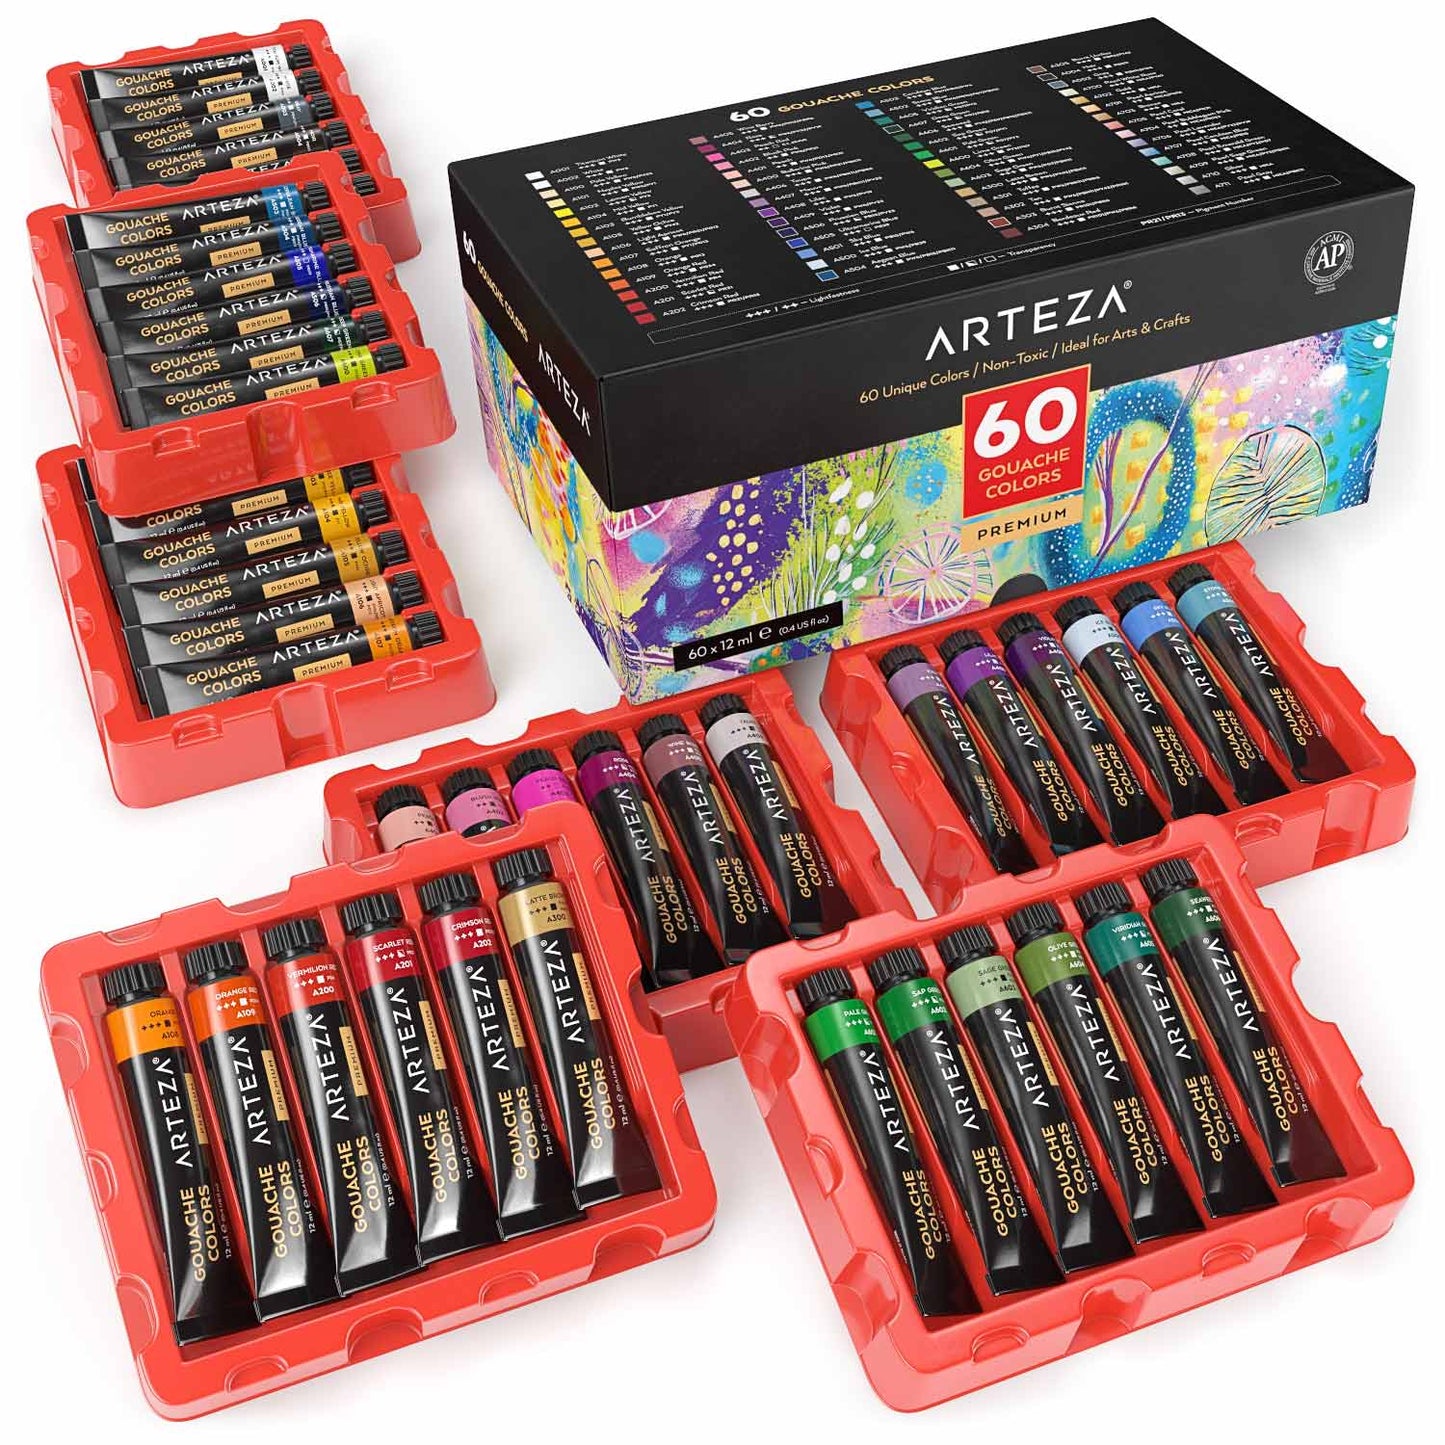  ARTEZA Gouache Paint Set, 24 Vibrant Colors with Jelly Gouache,  (1 oz, 30 ml) Tubs, Resealable Lids and Travel Case, Art Supplies for  Canvas, Paper, and Wood